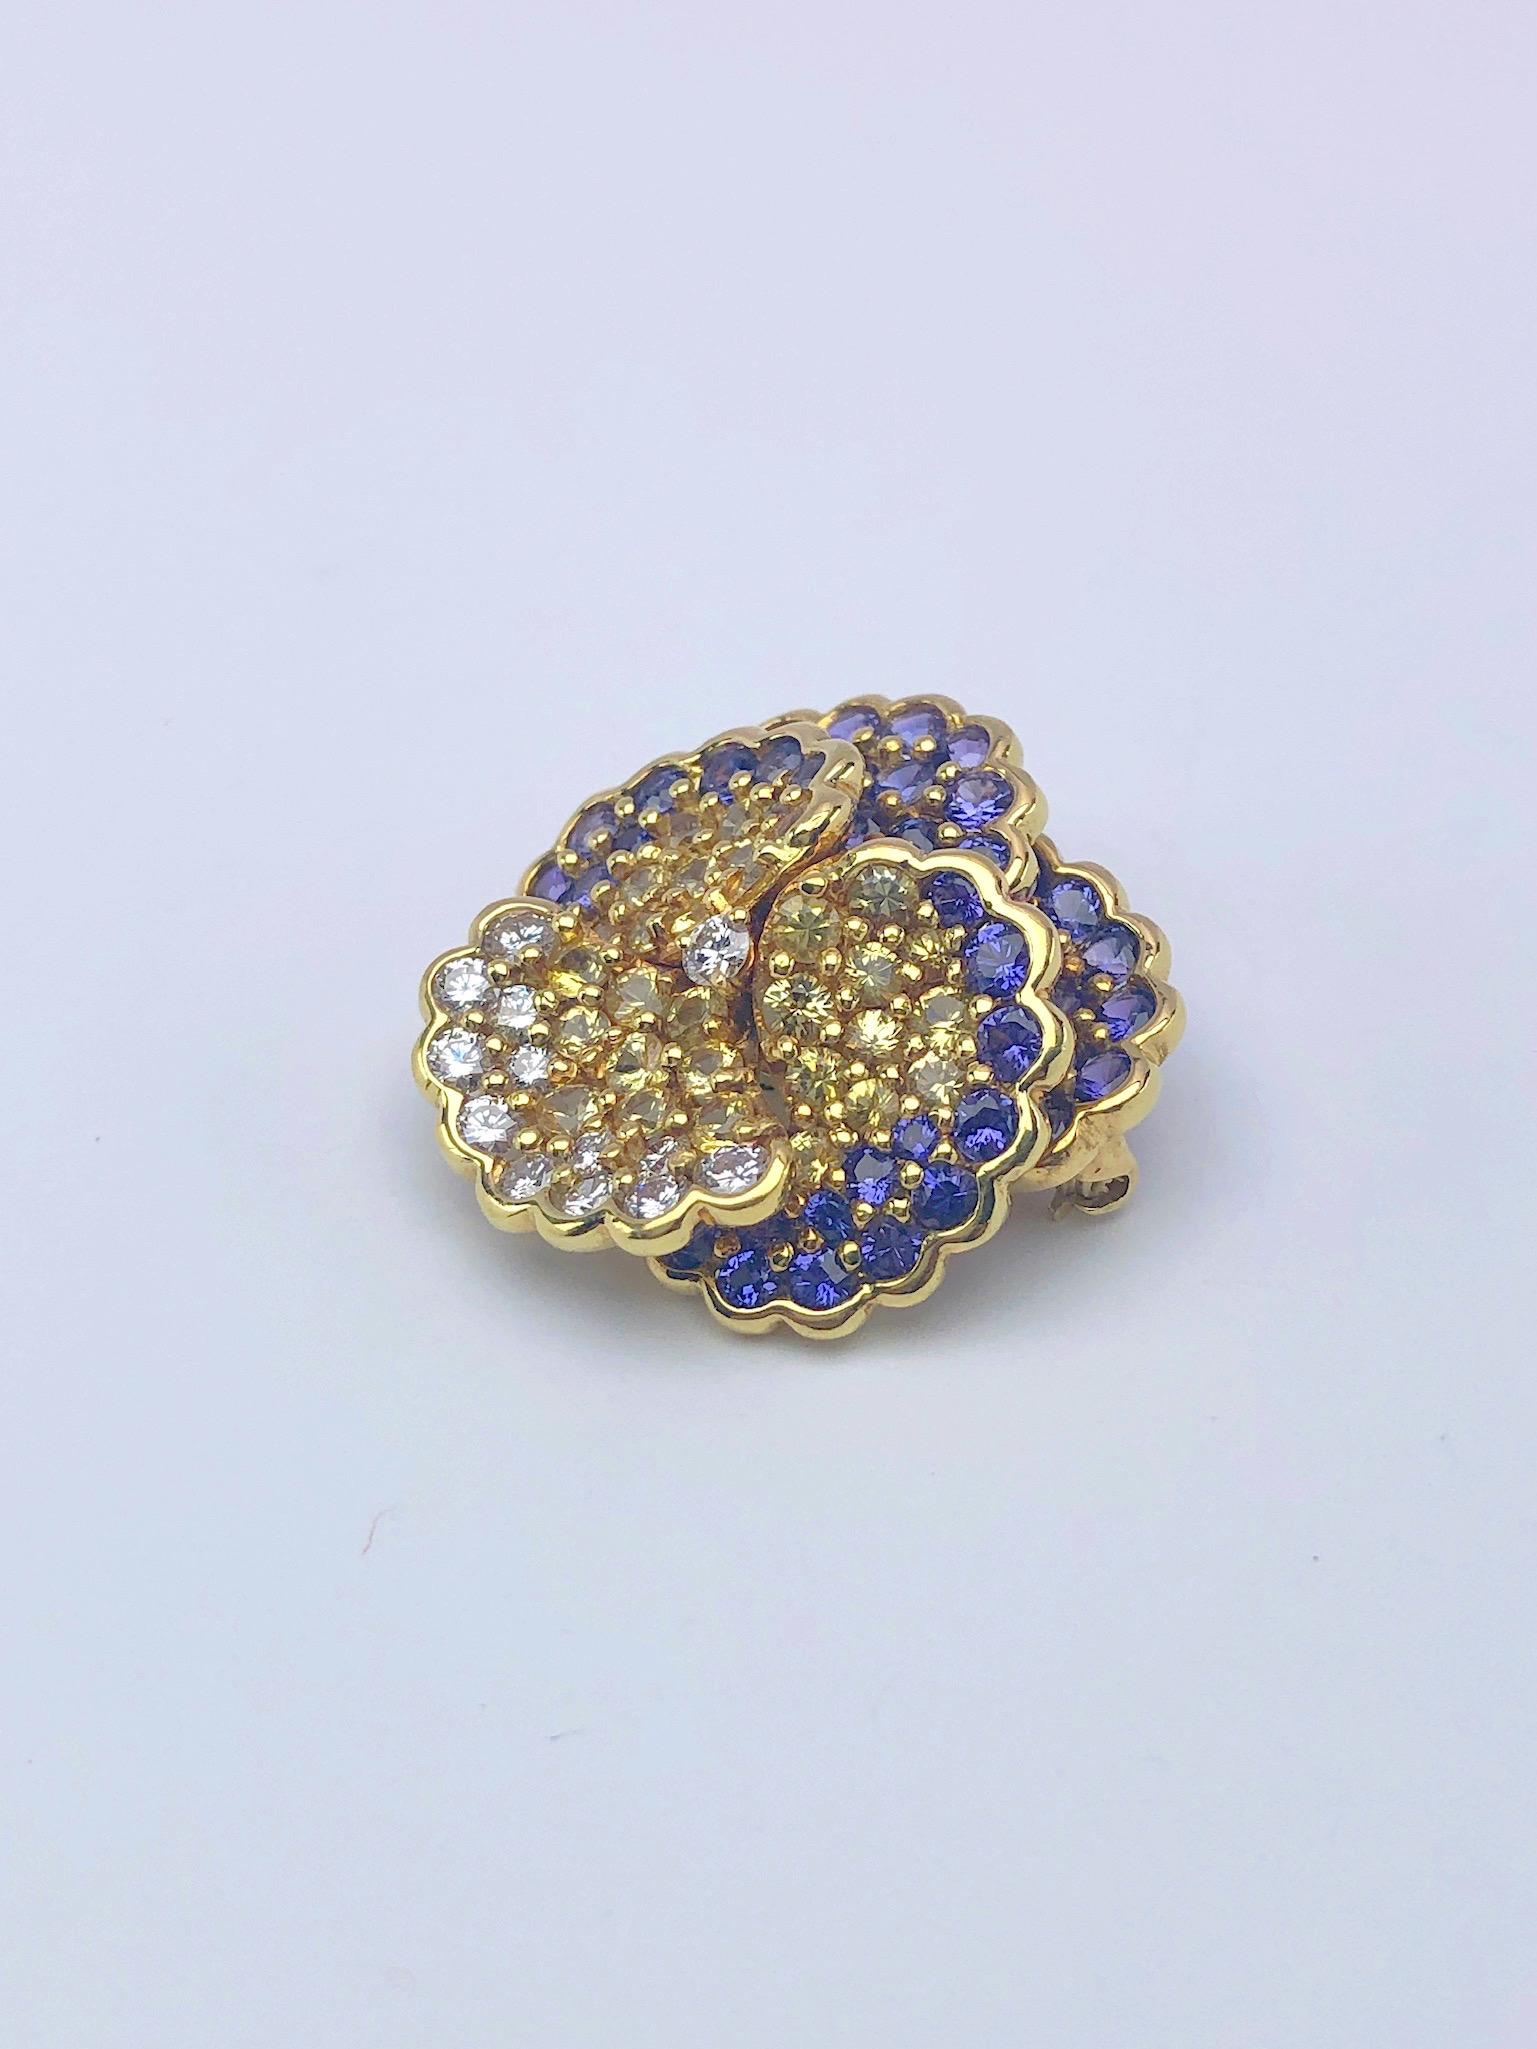 Contemporary Jean Vitau 18 Karat Yellow Gold Pansy Brooch with Diamonds and Colored Sapphires For Sale